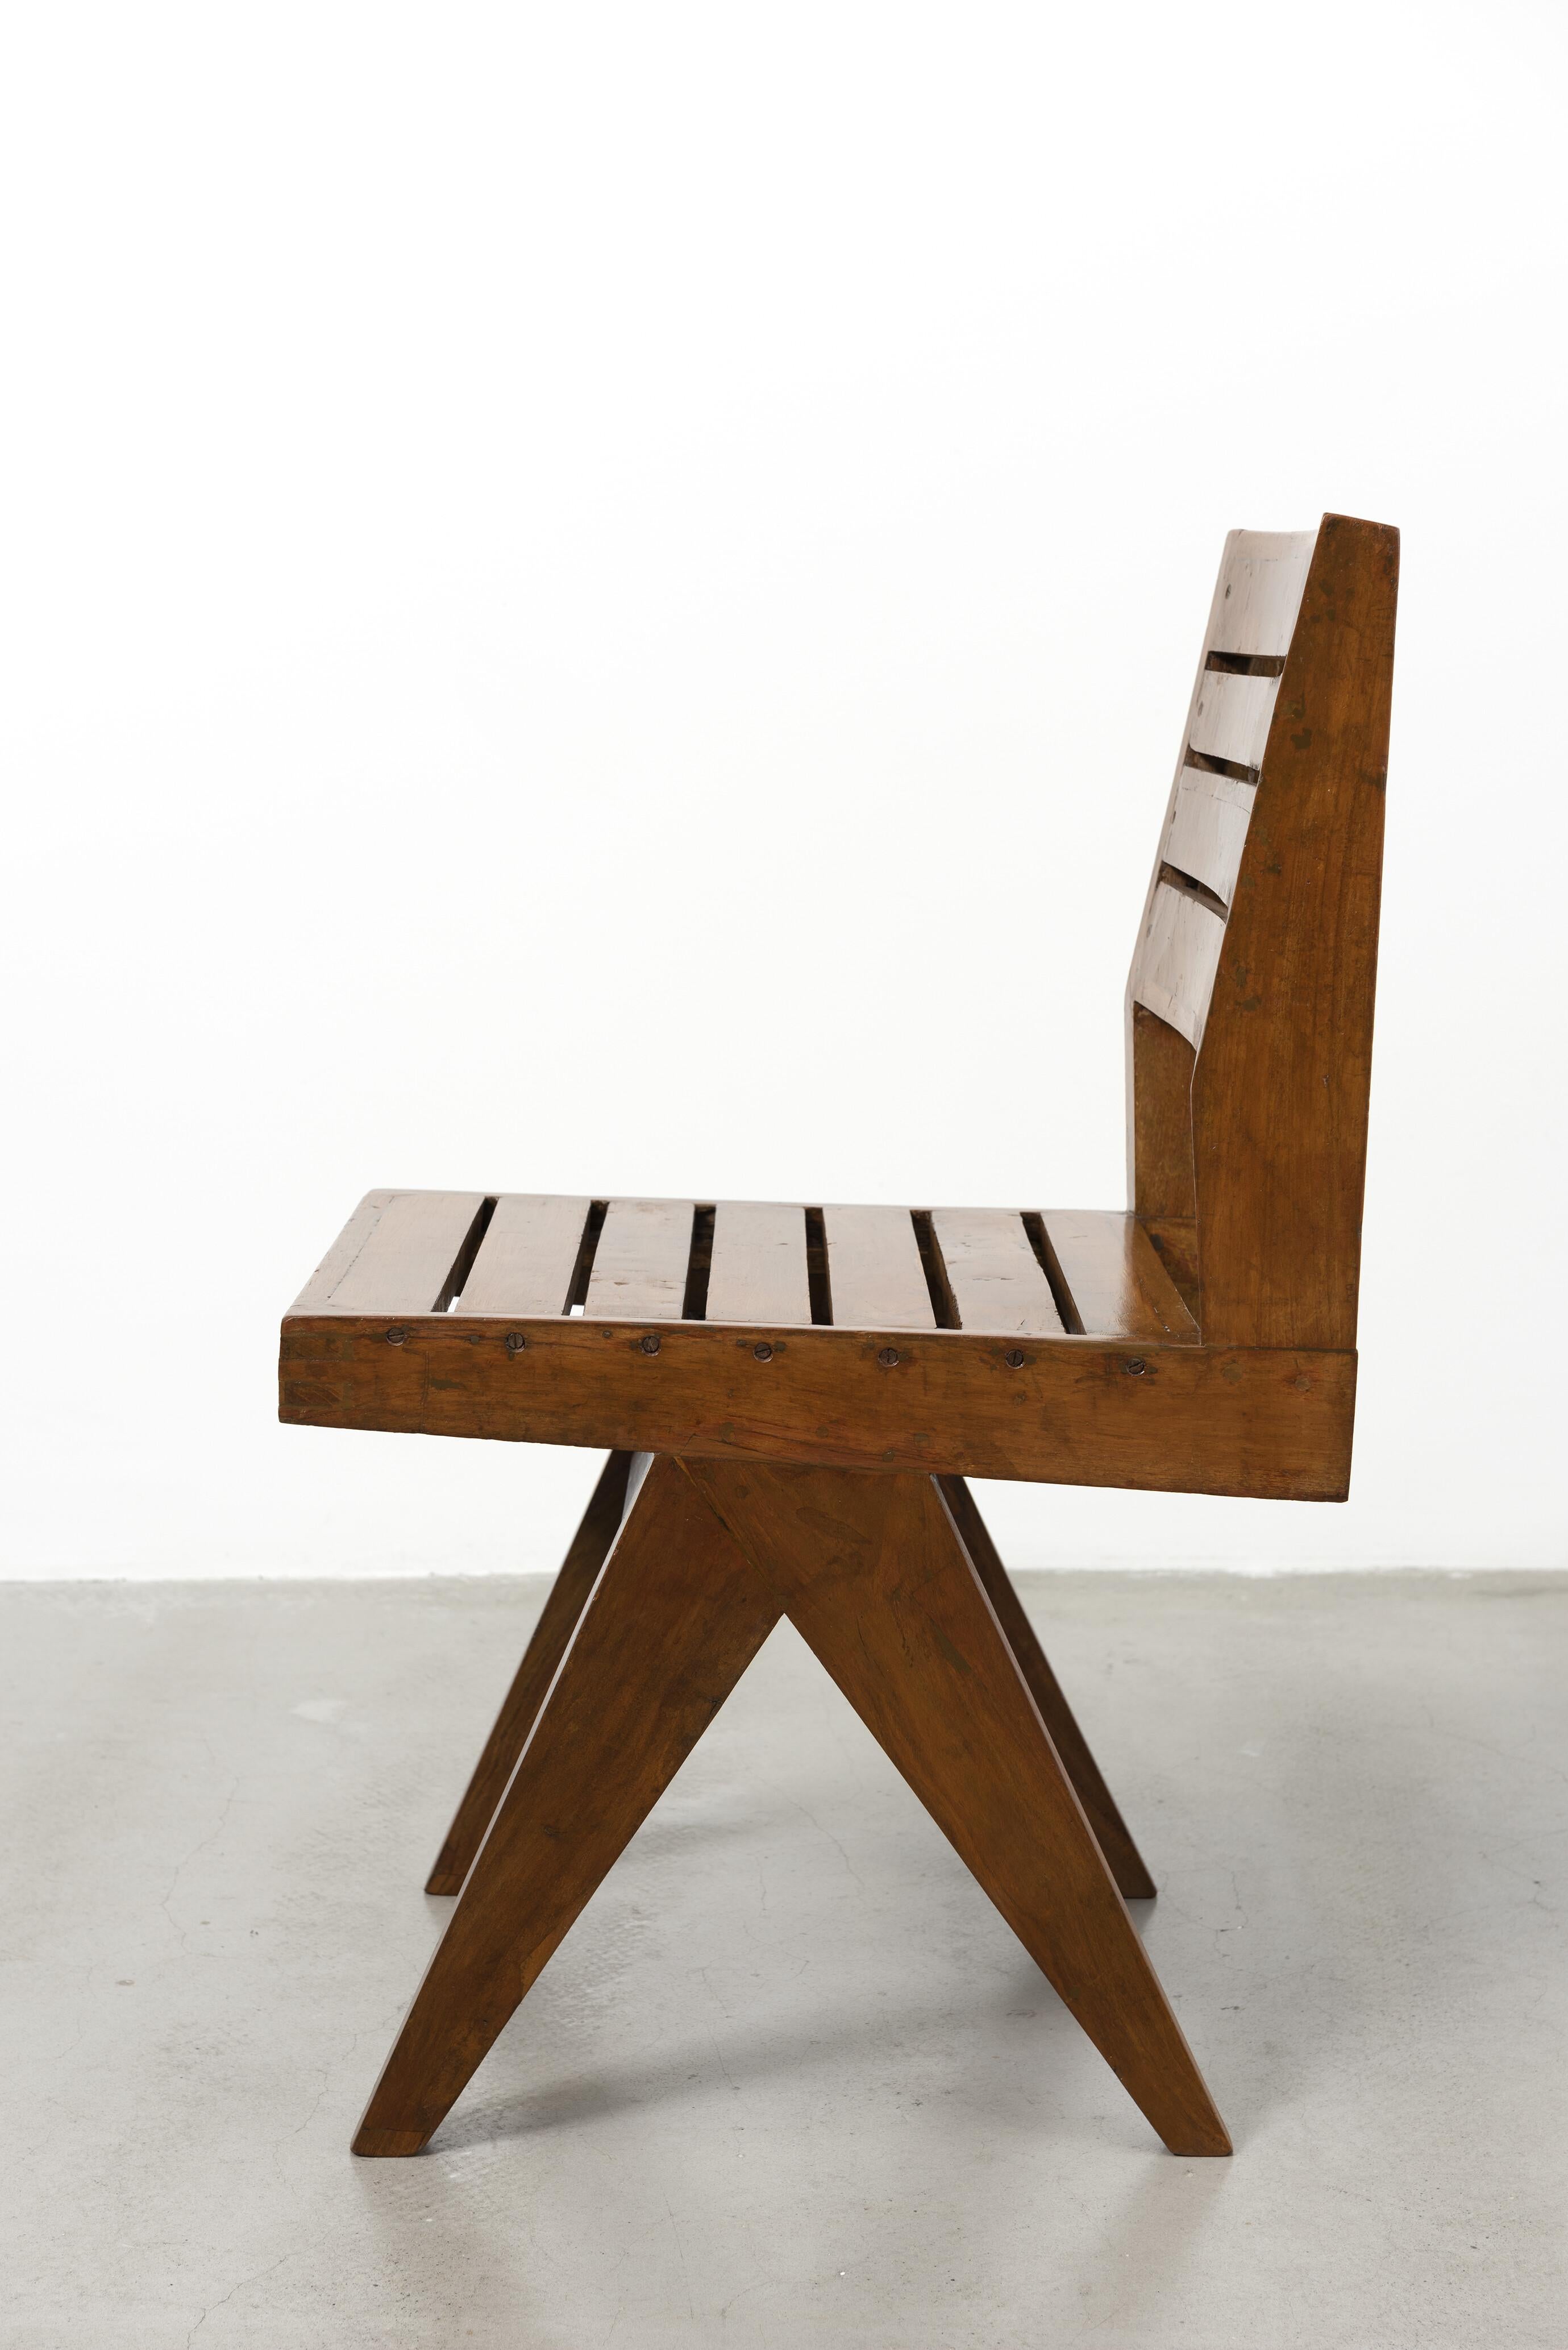 Indian Pierre Jeanneret, Type Chair, ca. 1958-59 For Sale